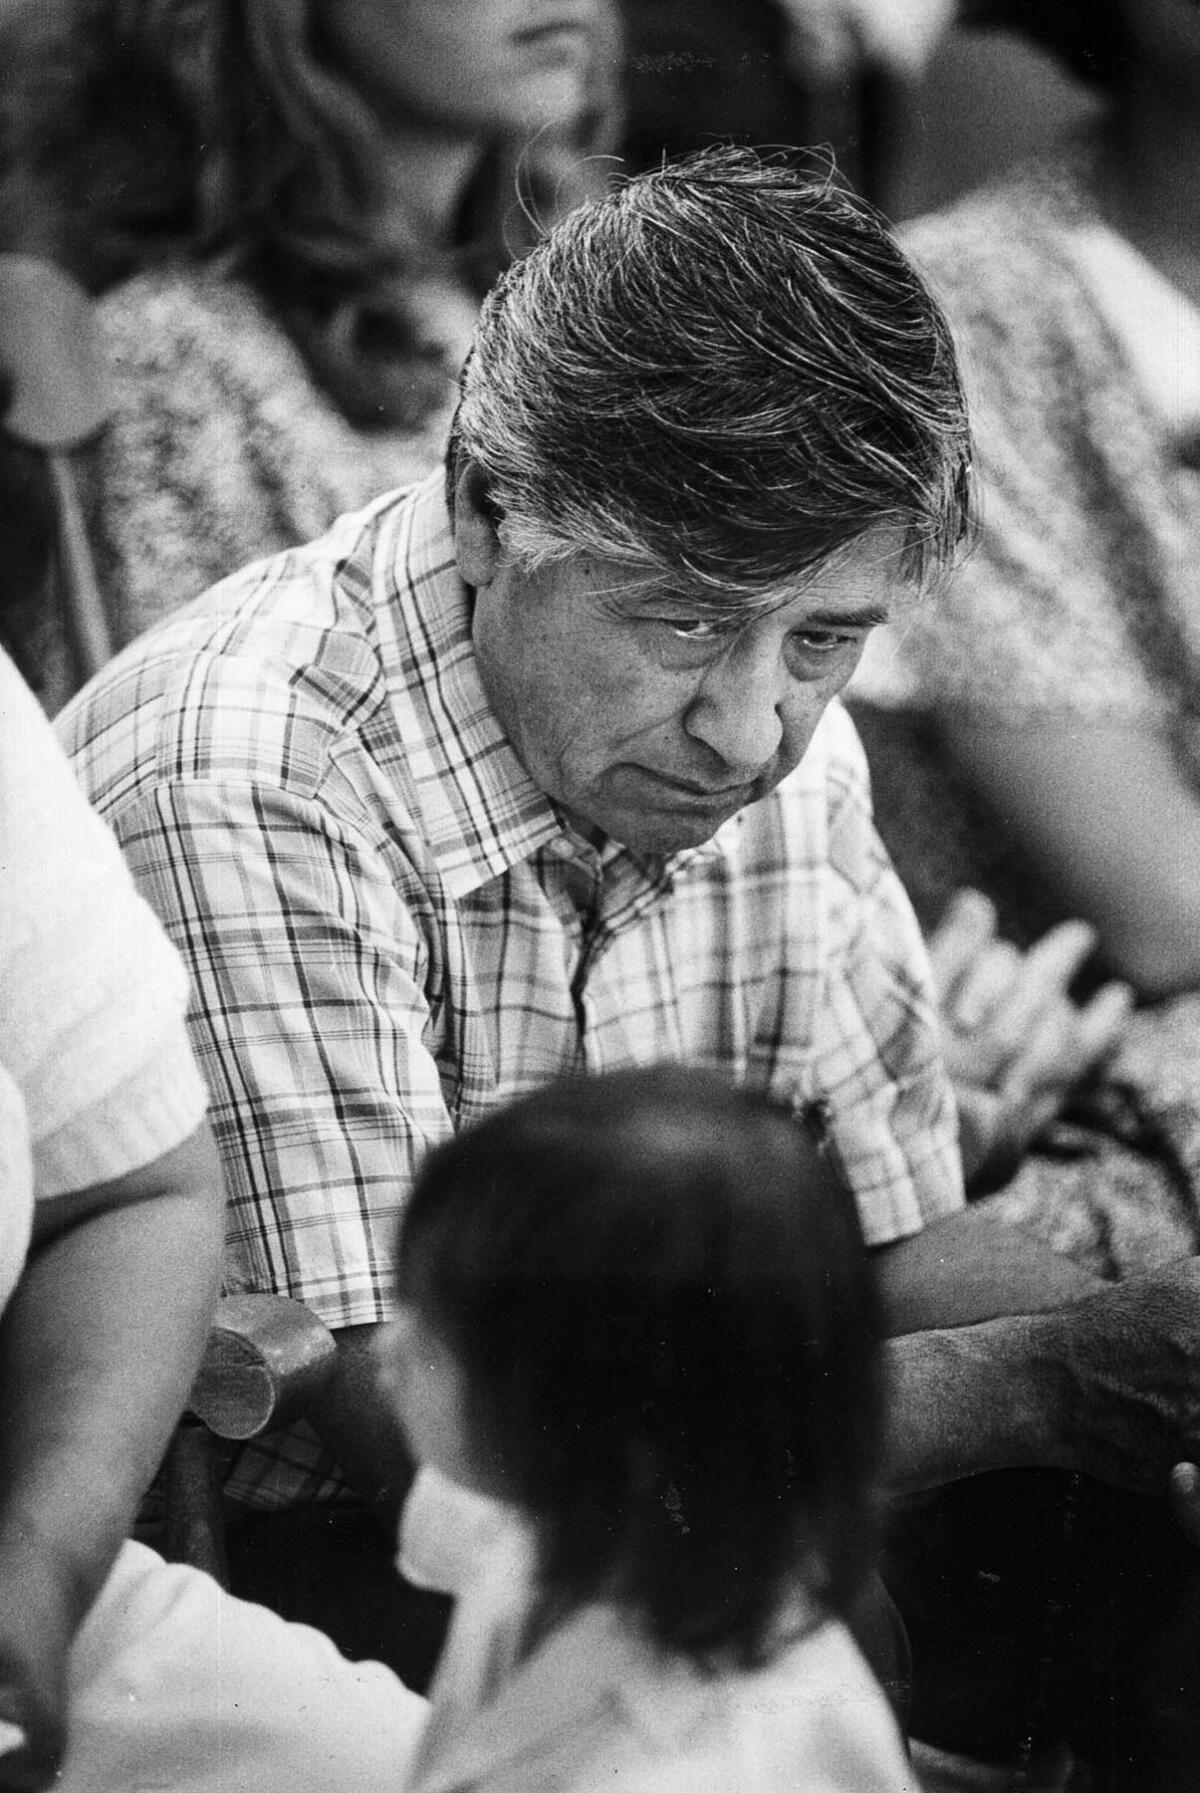 Aug. 4, 1988: Cesar Chavez gestures to one of his granddaughters to behave during a Mass in Delano, on his 18th day of fasting against the use of certain pesticides on grape crops.